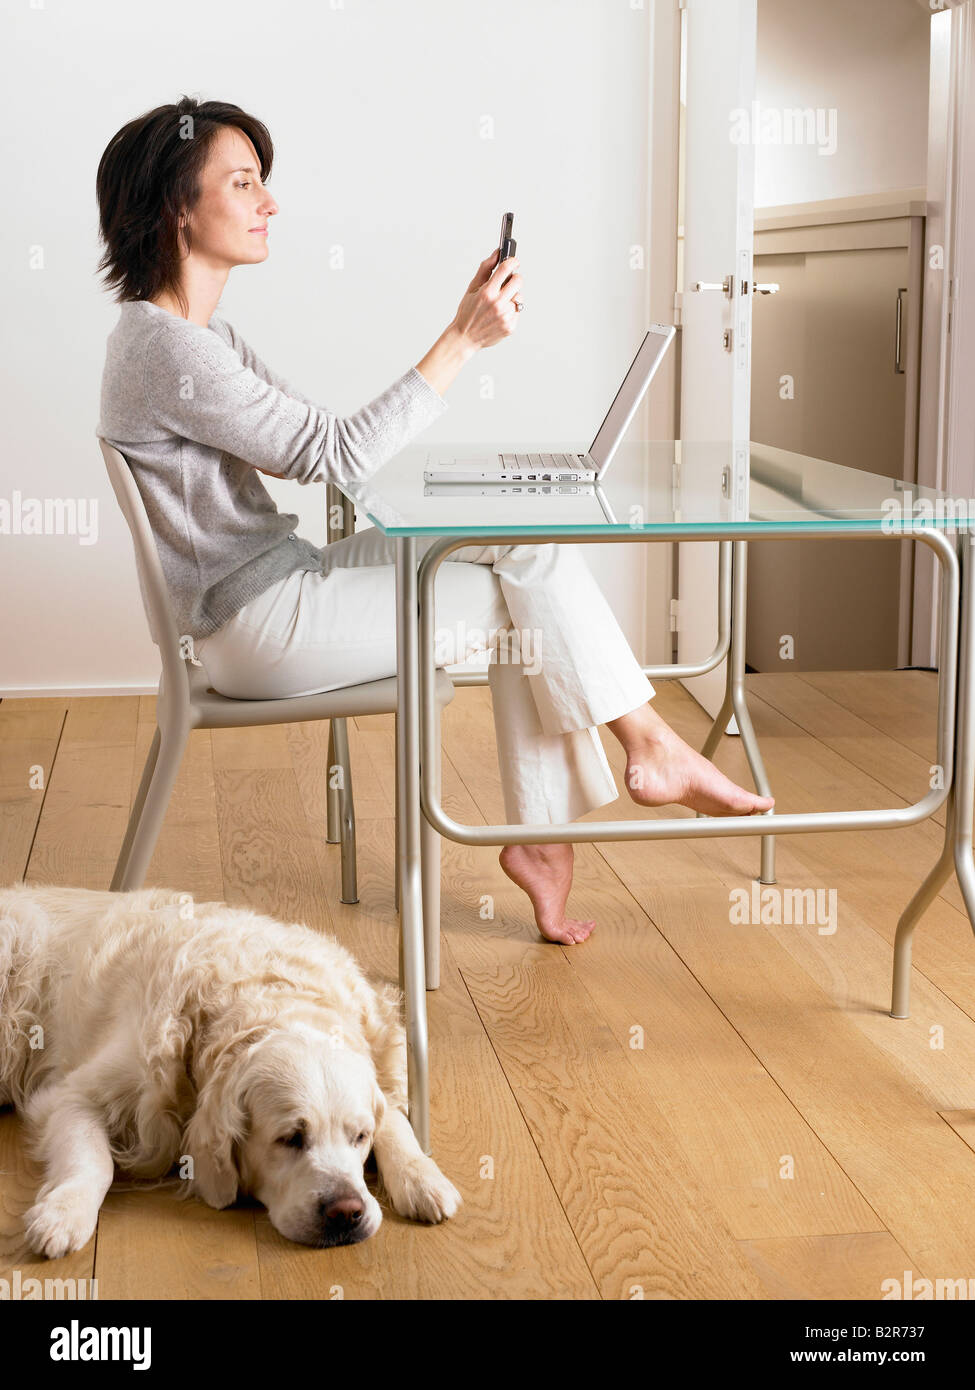 Woman at her desk, dog sleeping Stock Photo